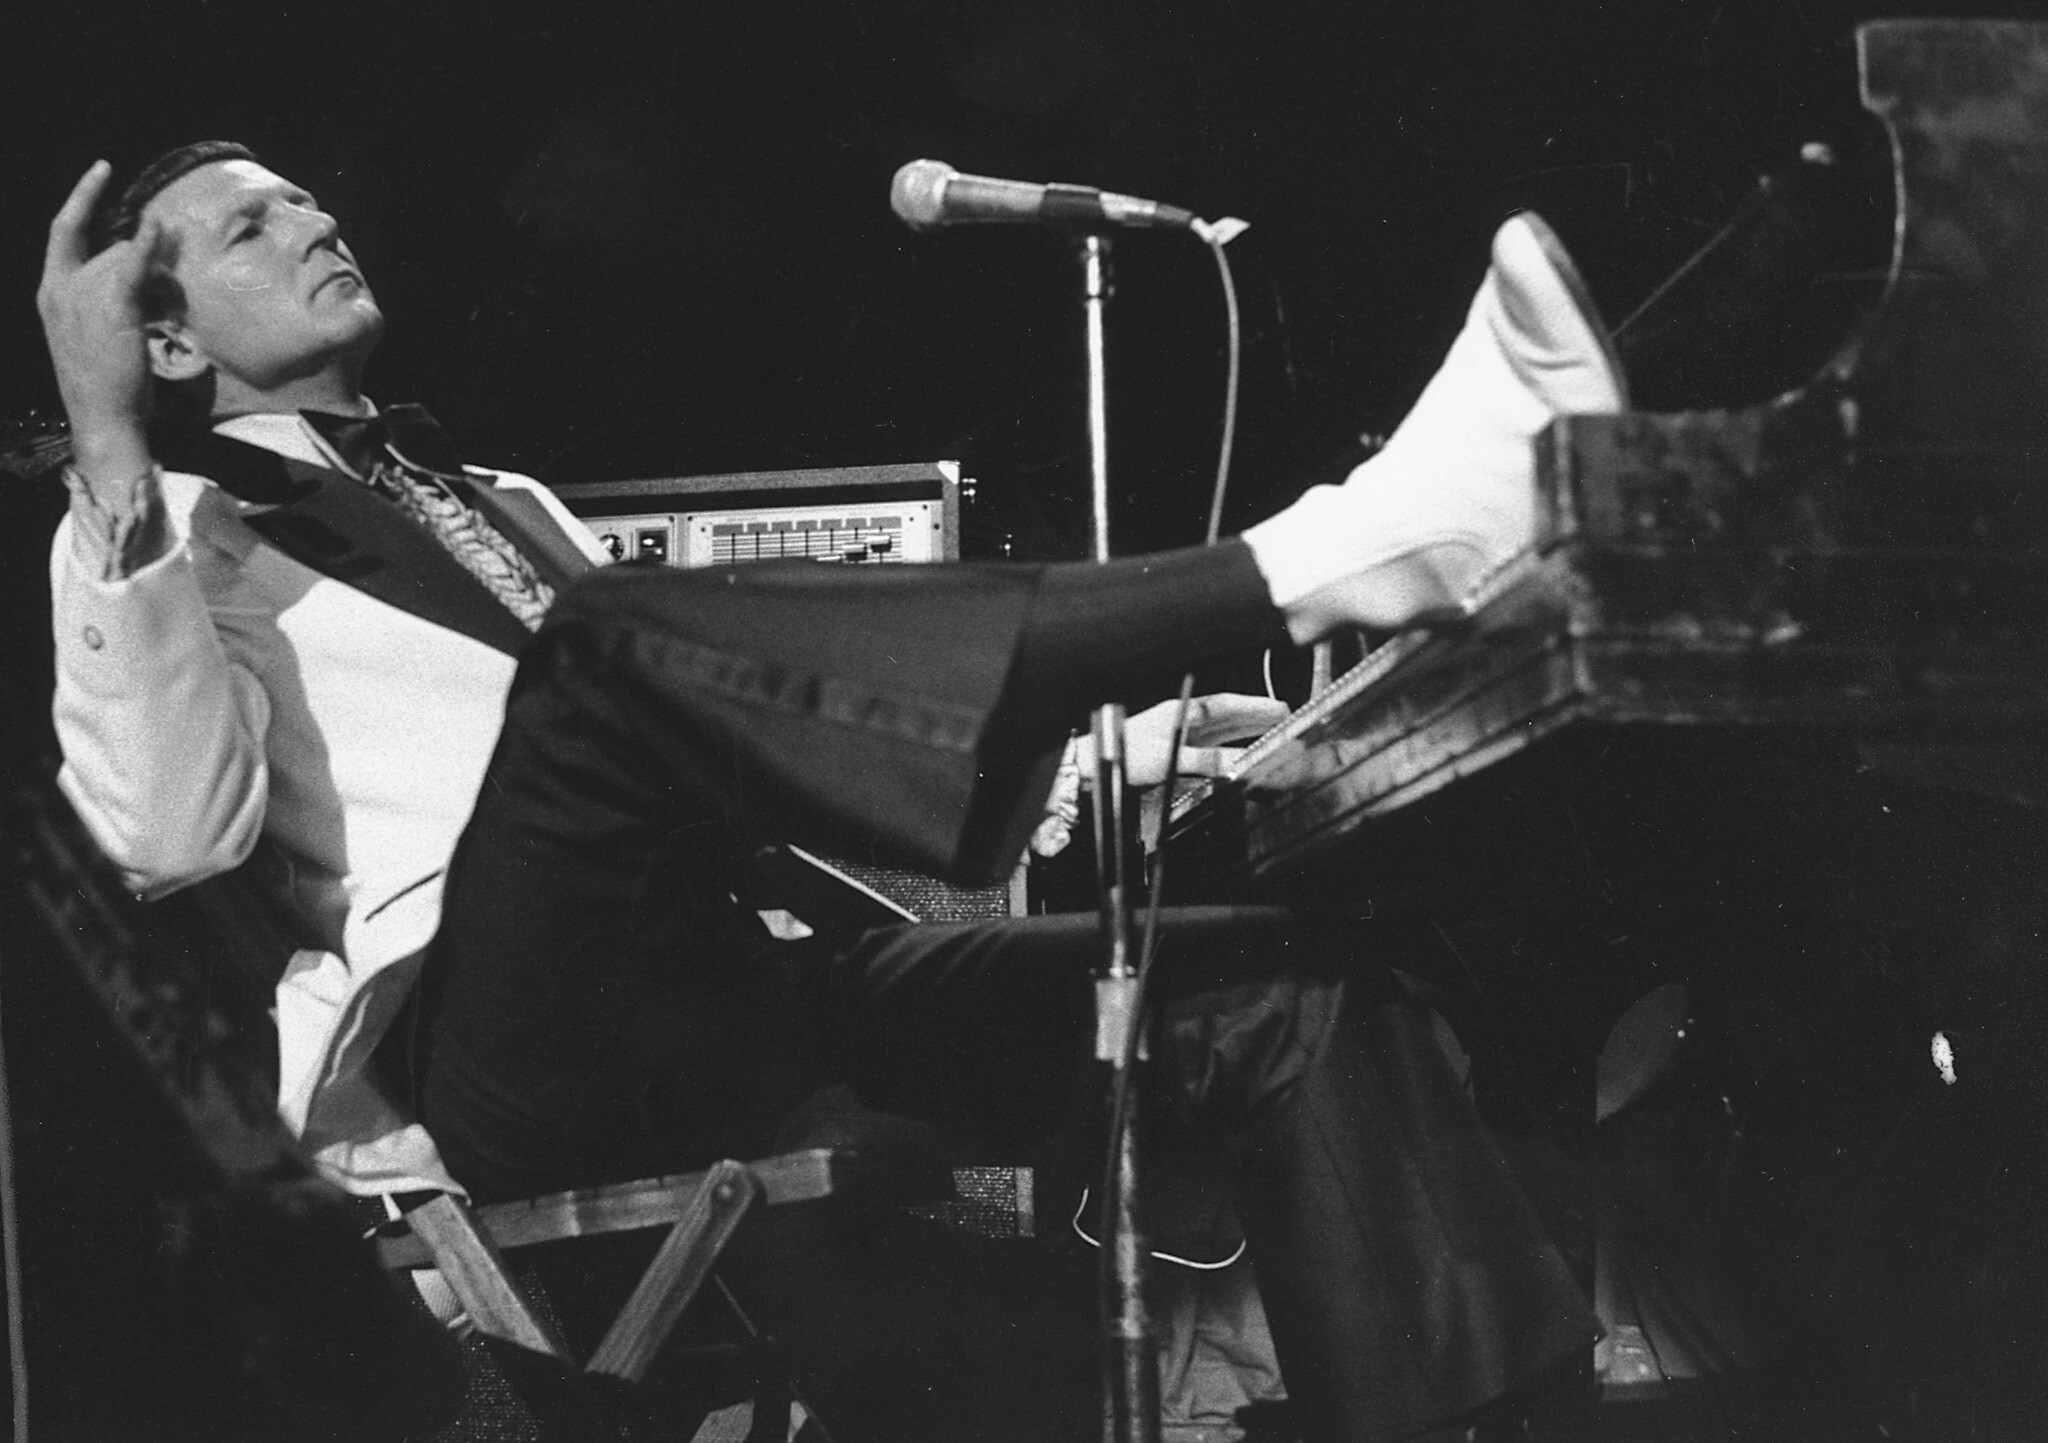 Jerry Lee Lewis, rock 'n' roll's outrageous pioneer, dies at 87 | The Times  of Israel